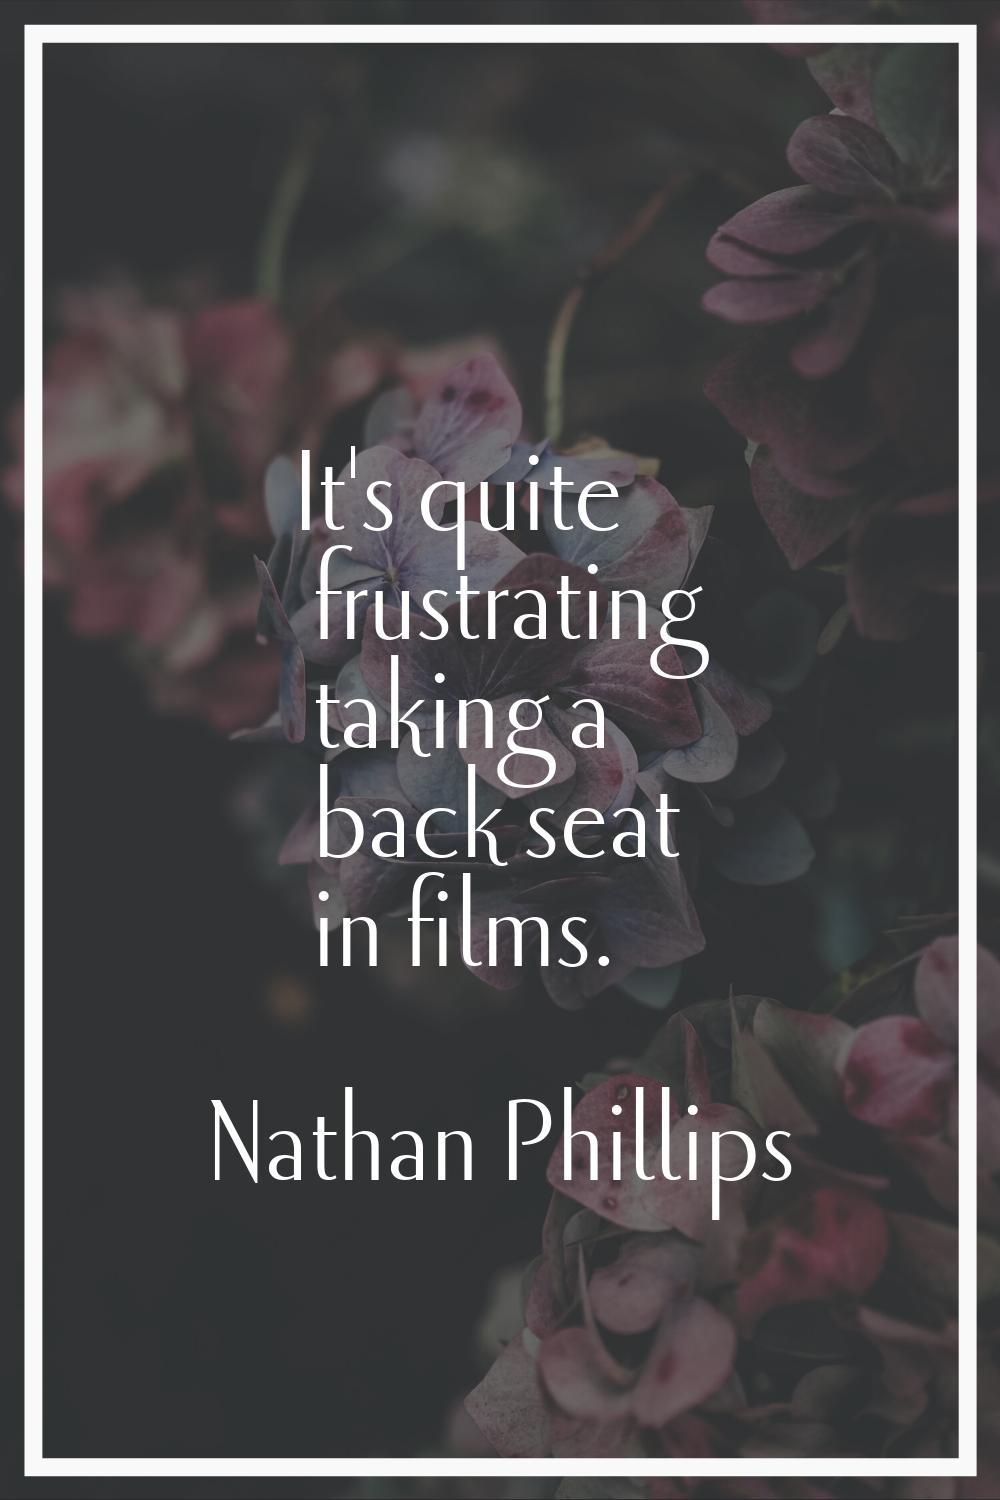 It's quite frustrating taking a back seat in films.